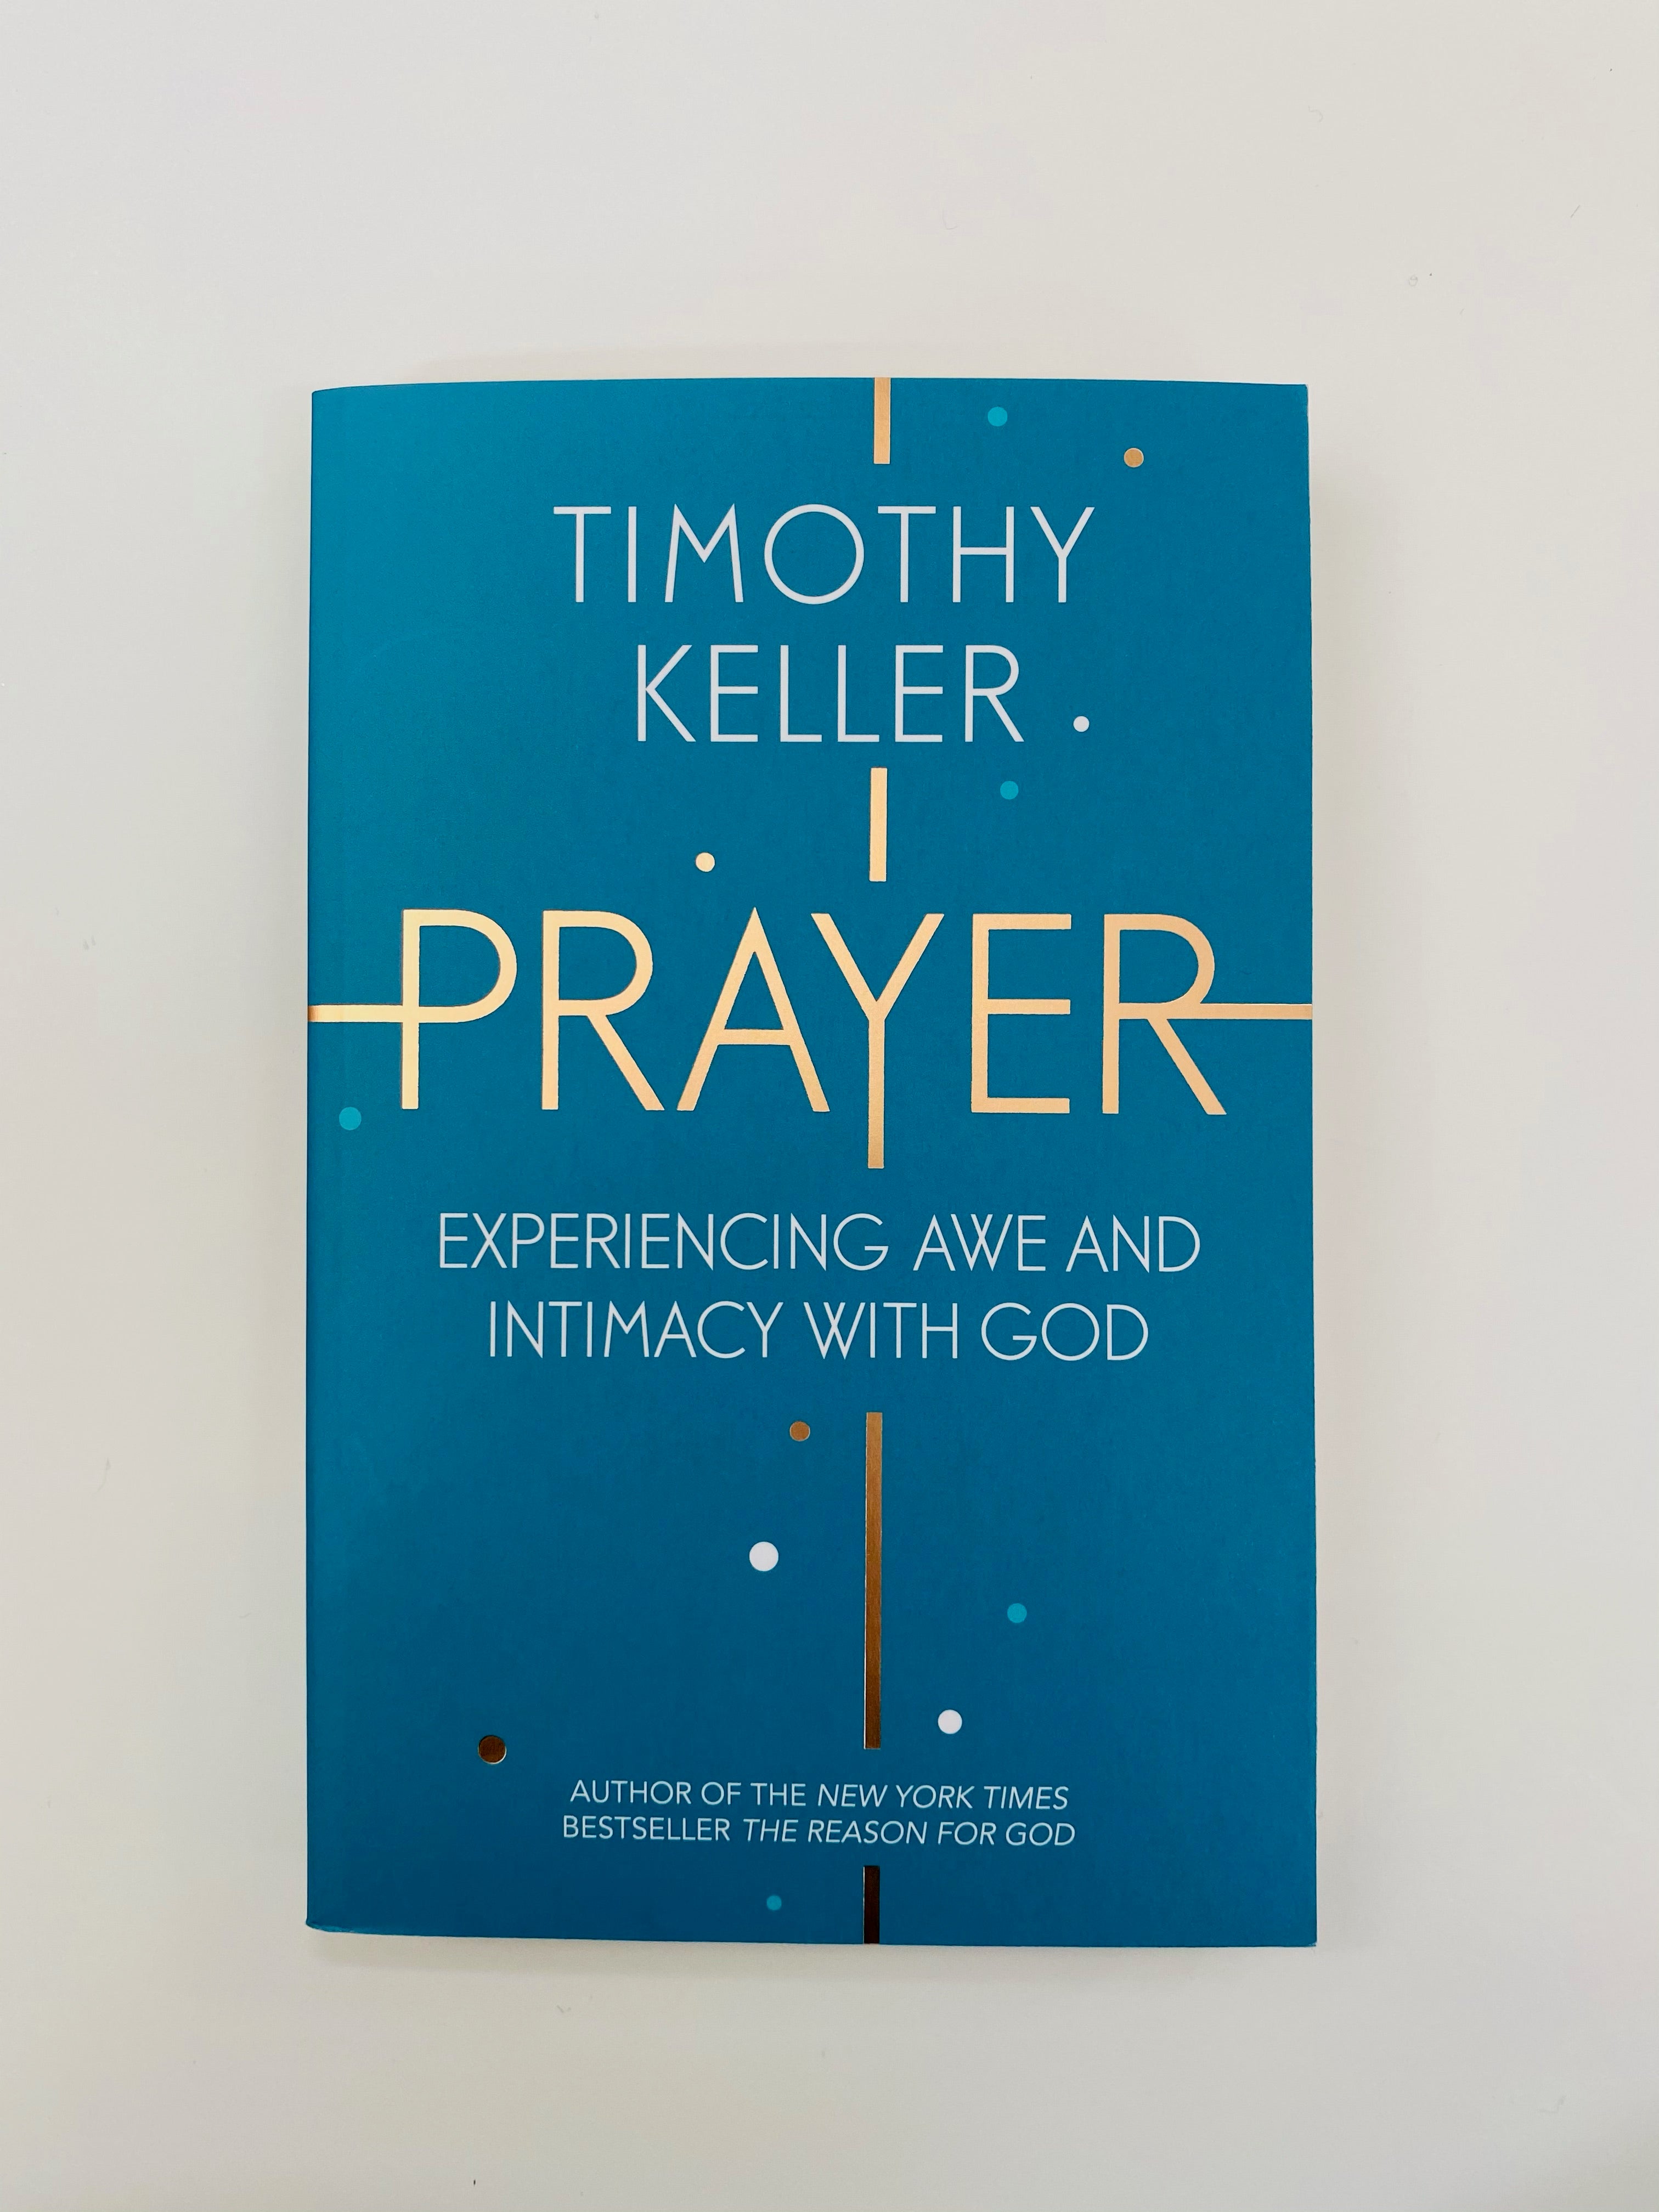 and　Well　Awe　Prayer:　God　with　Jacobs　Experiencing　Bookshop　Intimacy　–